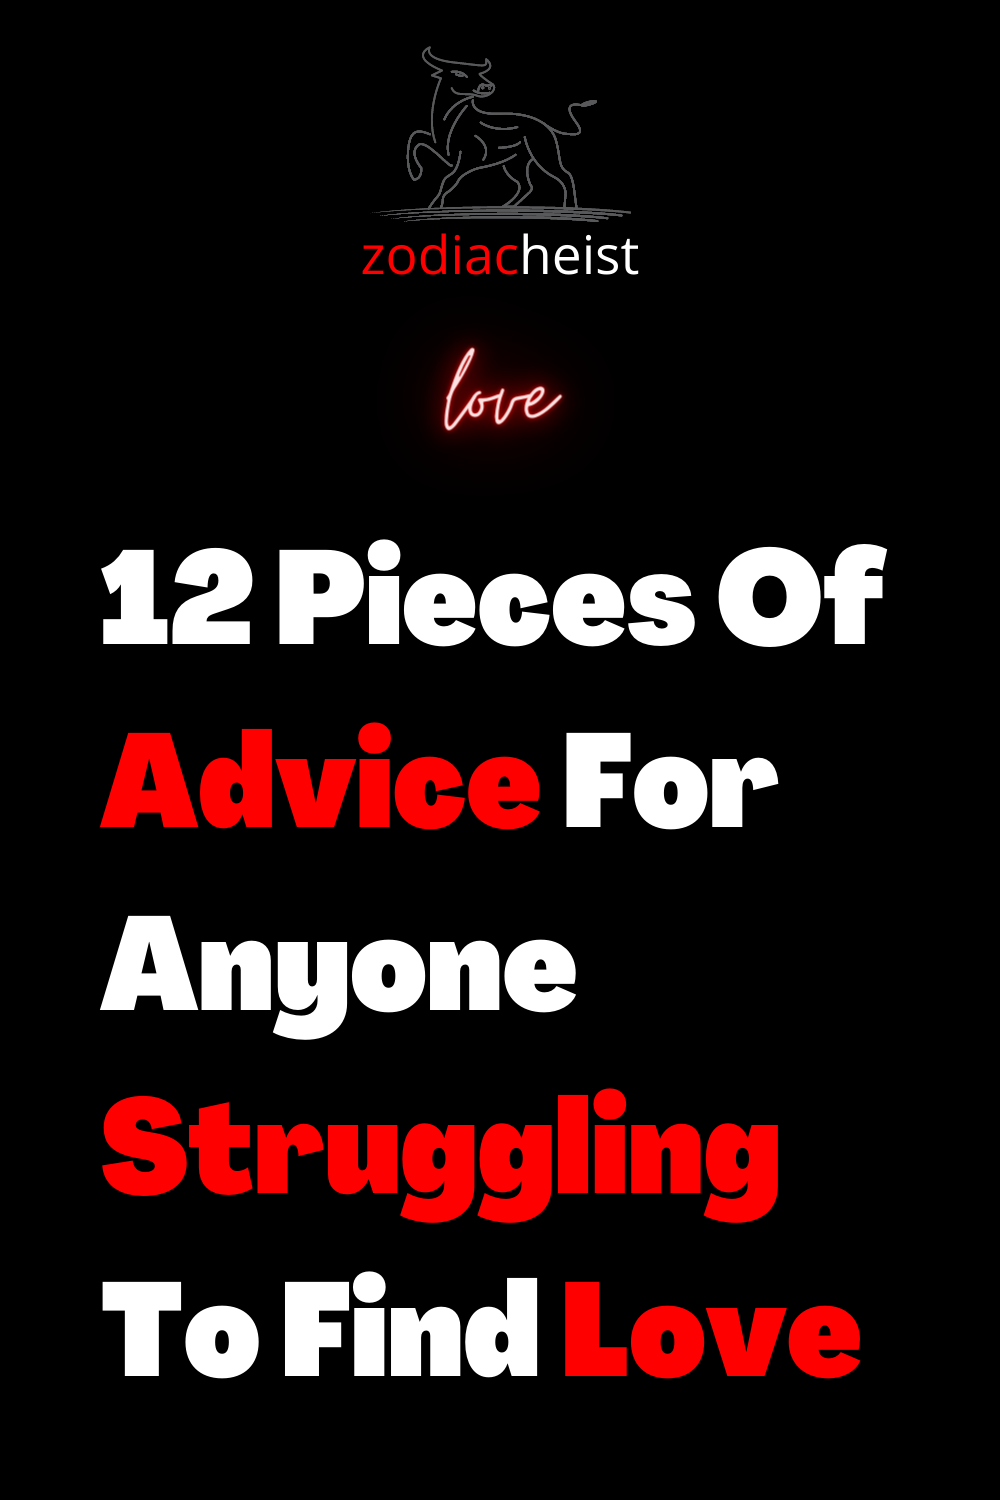 12 Pieces Of Advice For Anyone Struggling To Find Love